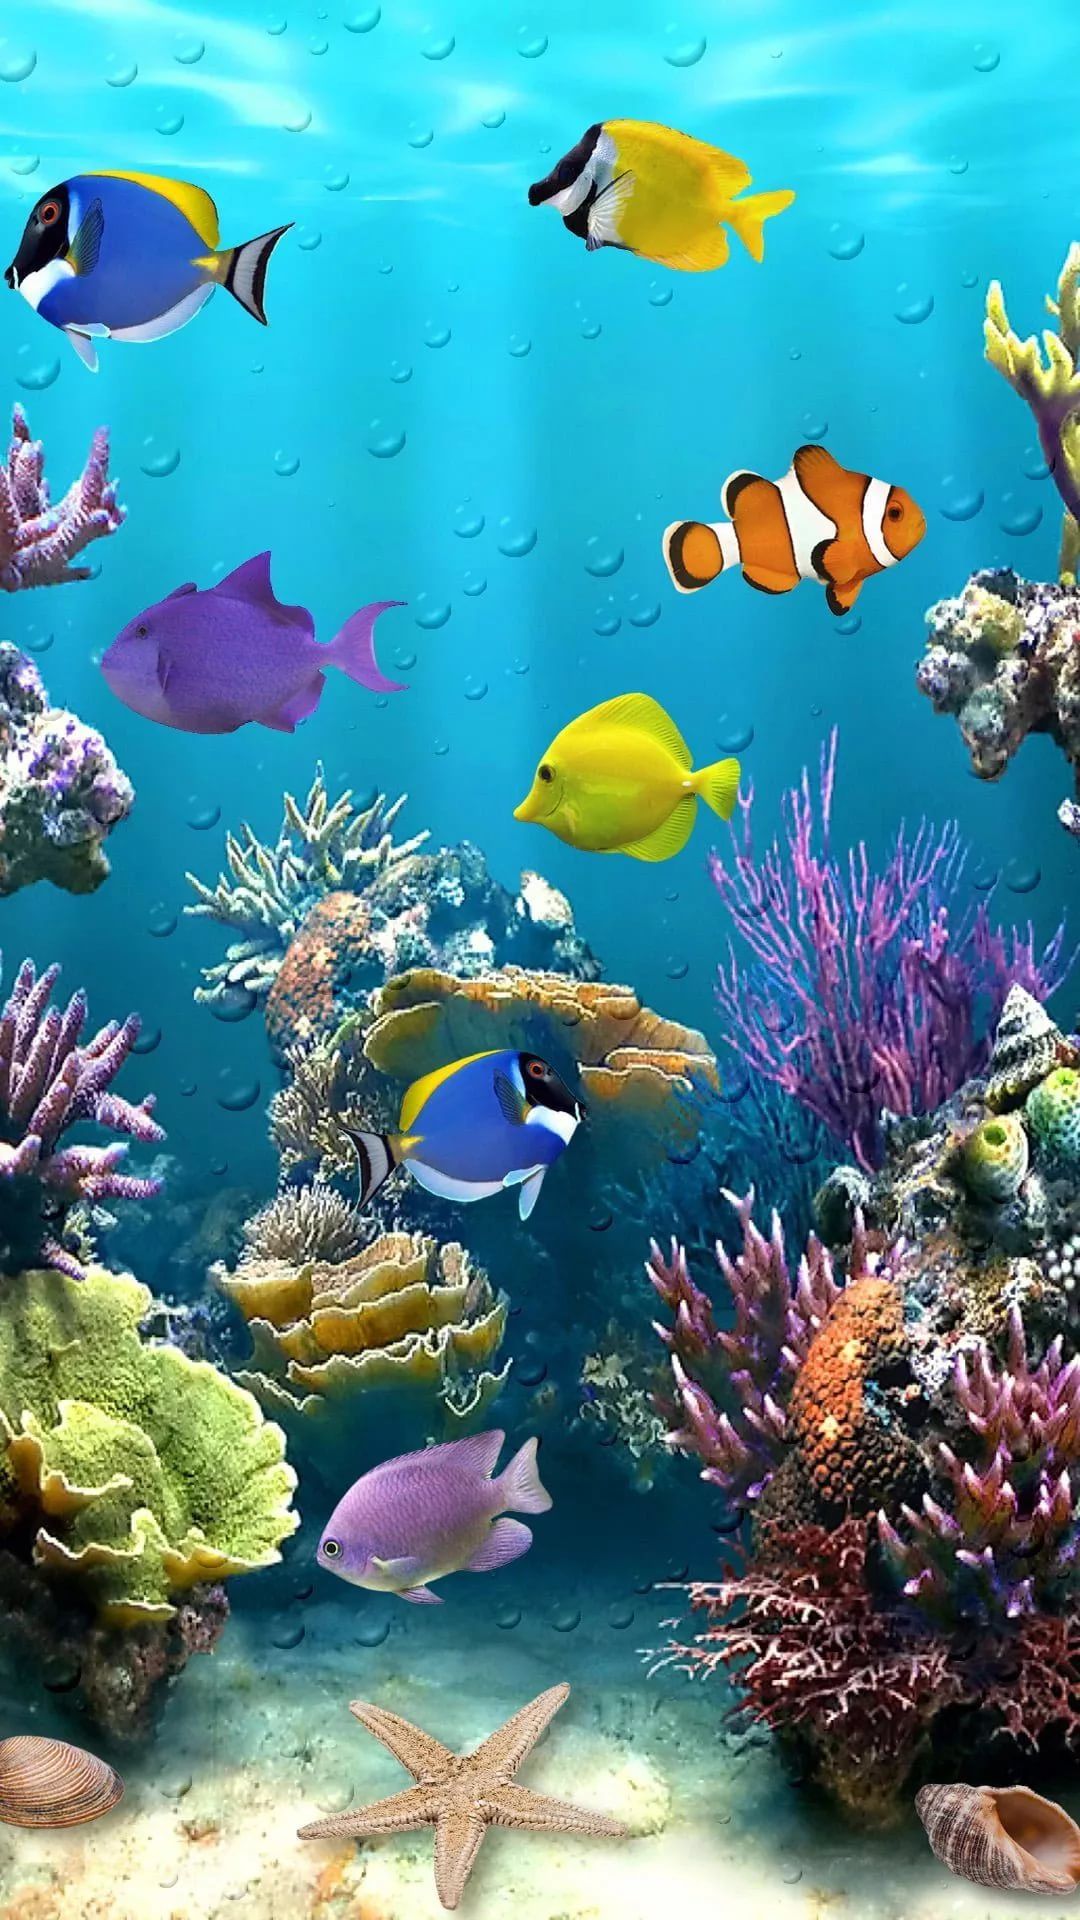 Coral Reef Iphone Wallpapers